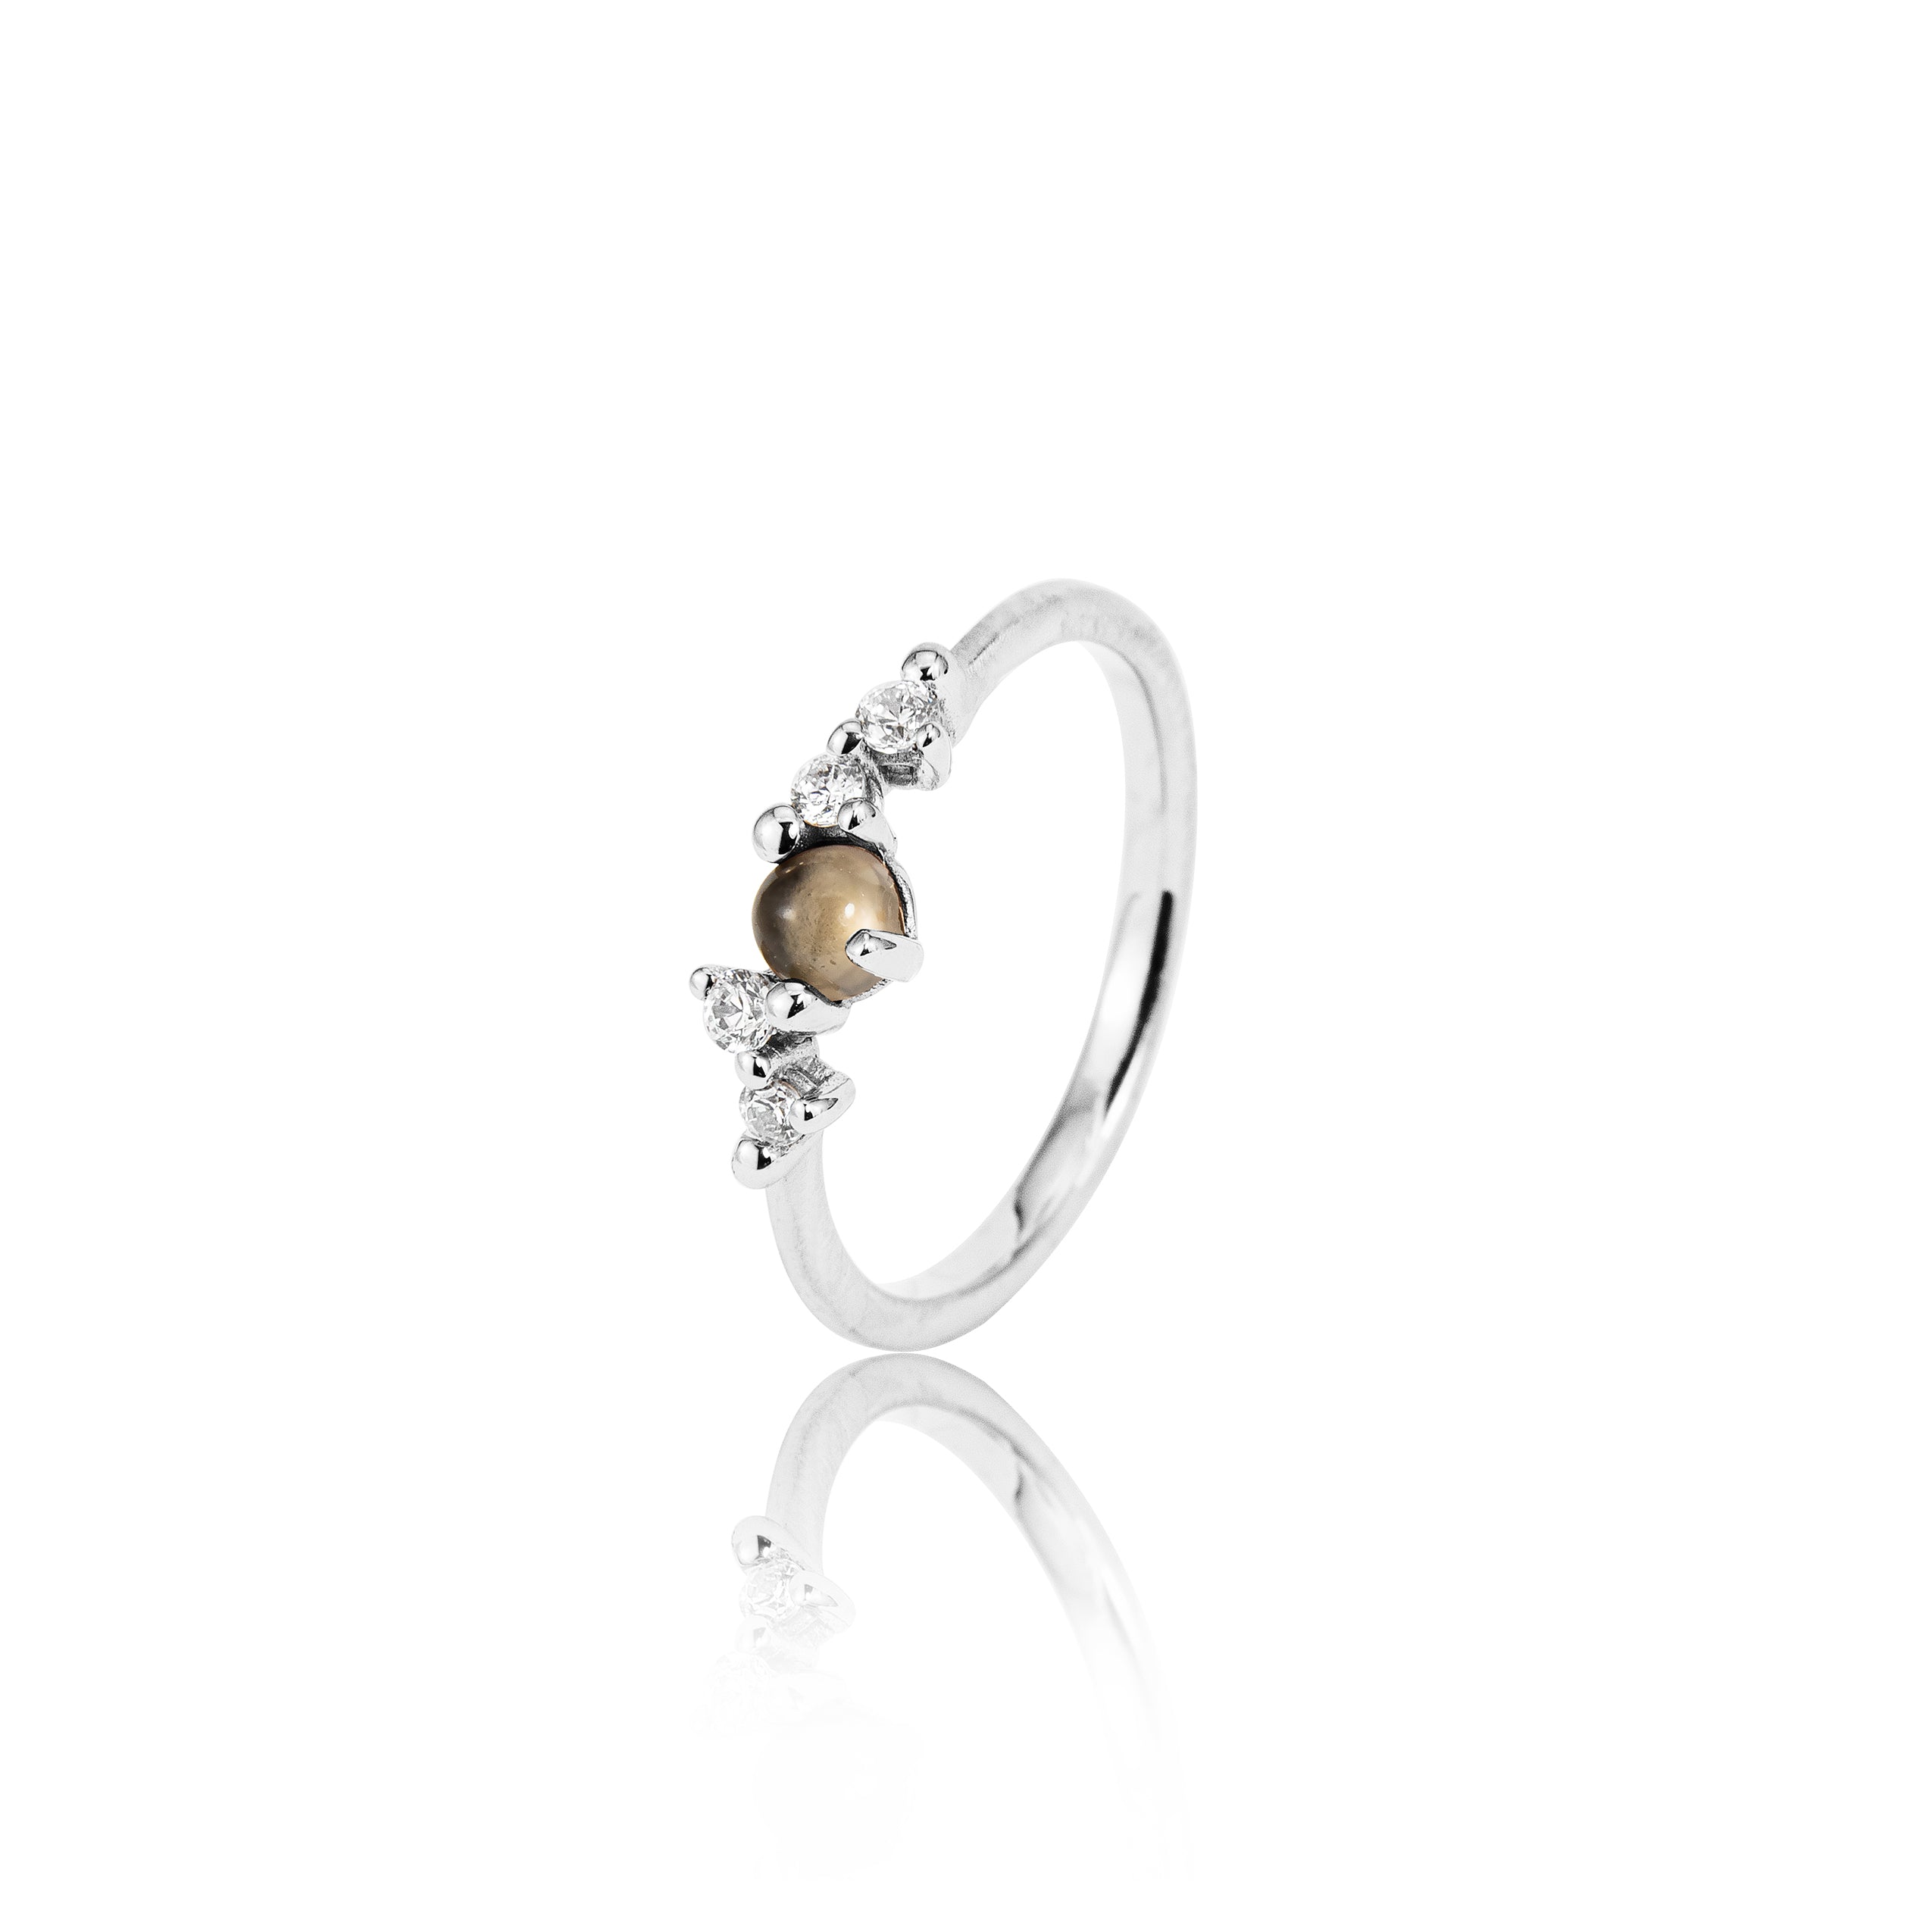 Stellini ring "smal" in 585/- gold with smoky quartz